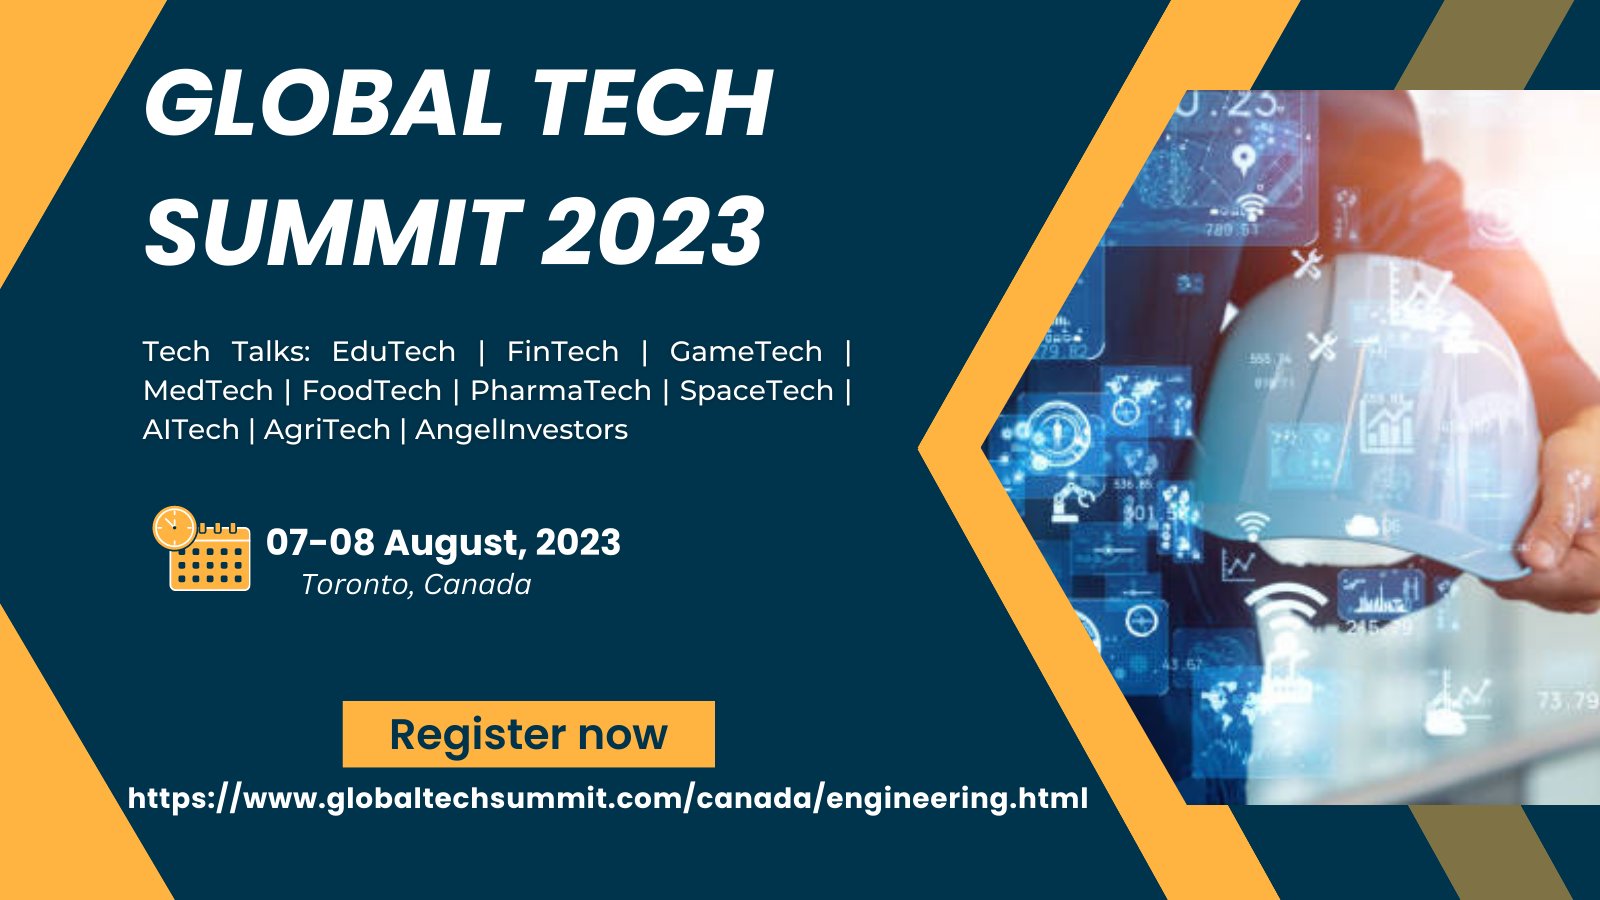 Igniting Innovation: Unleash Your Engineering Potential at the Global Tech Summit 2023